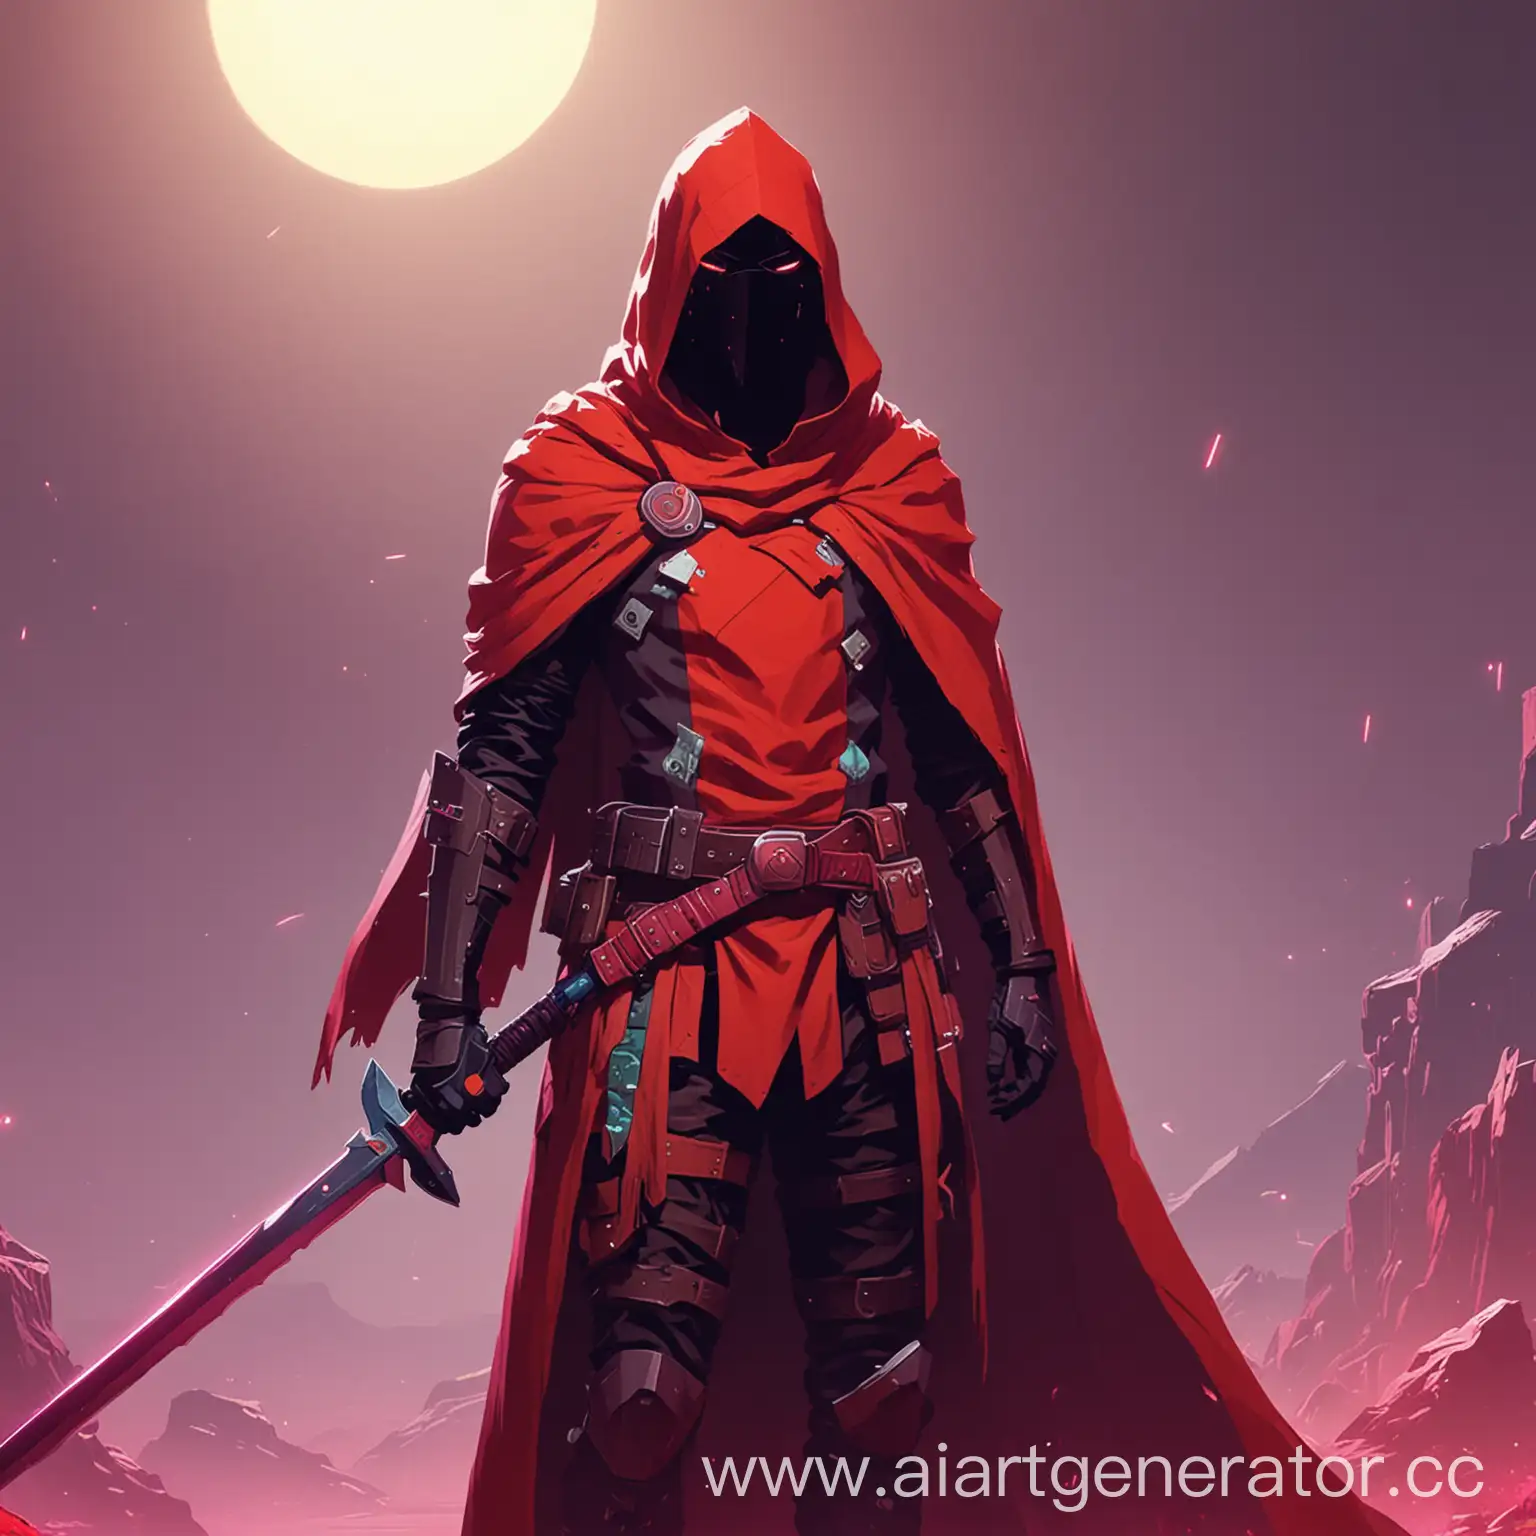 Hyper-Light-Drifter-Character-in-Medieval-Armor-with-Red-Light-Sword